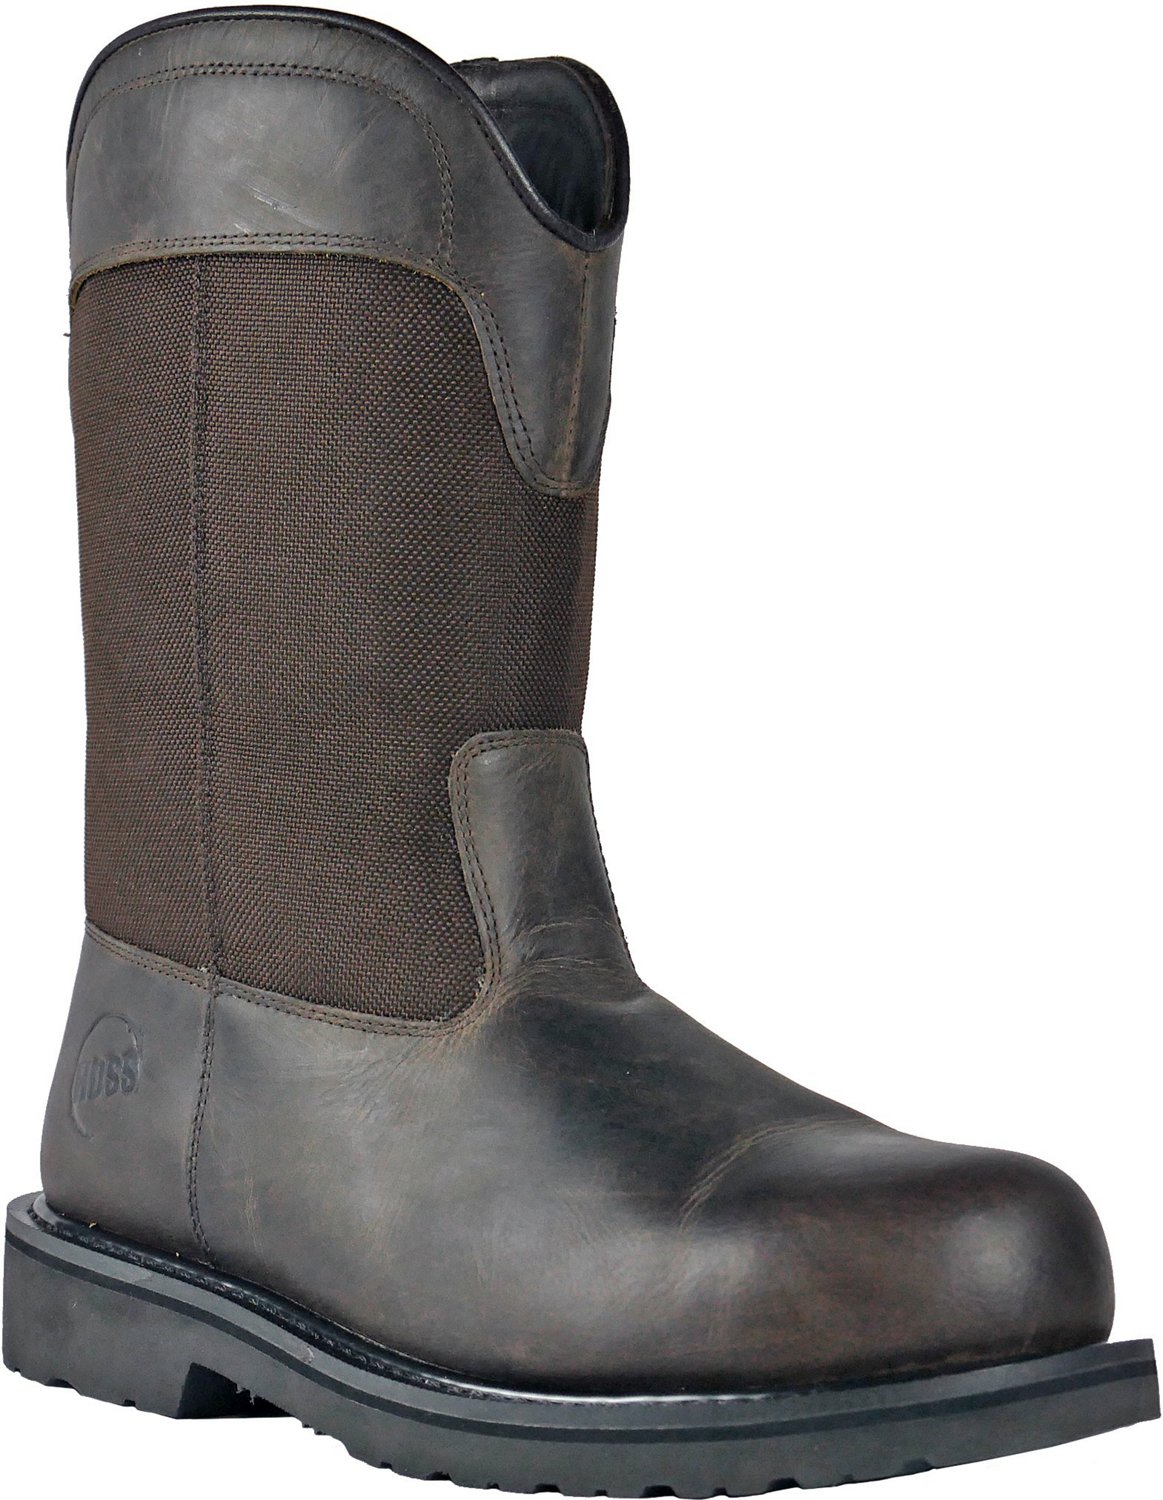 Hoss Boot Company Men's Buck Grizzly Steel Safety Toe Pull On Work ...